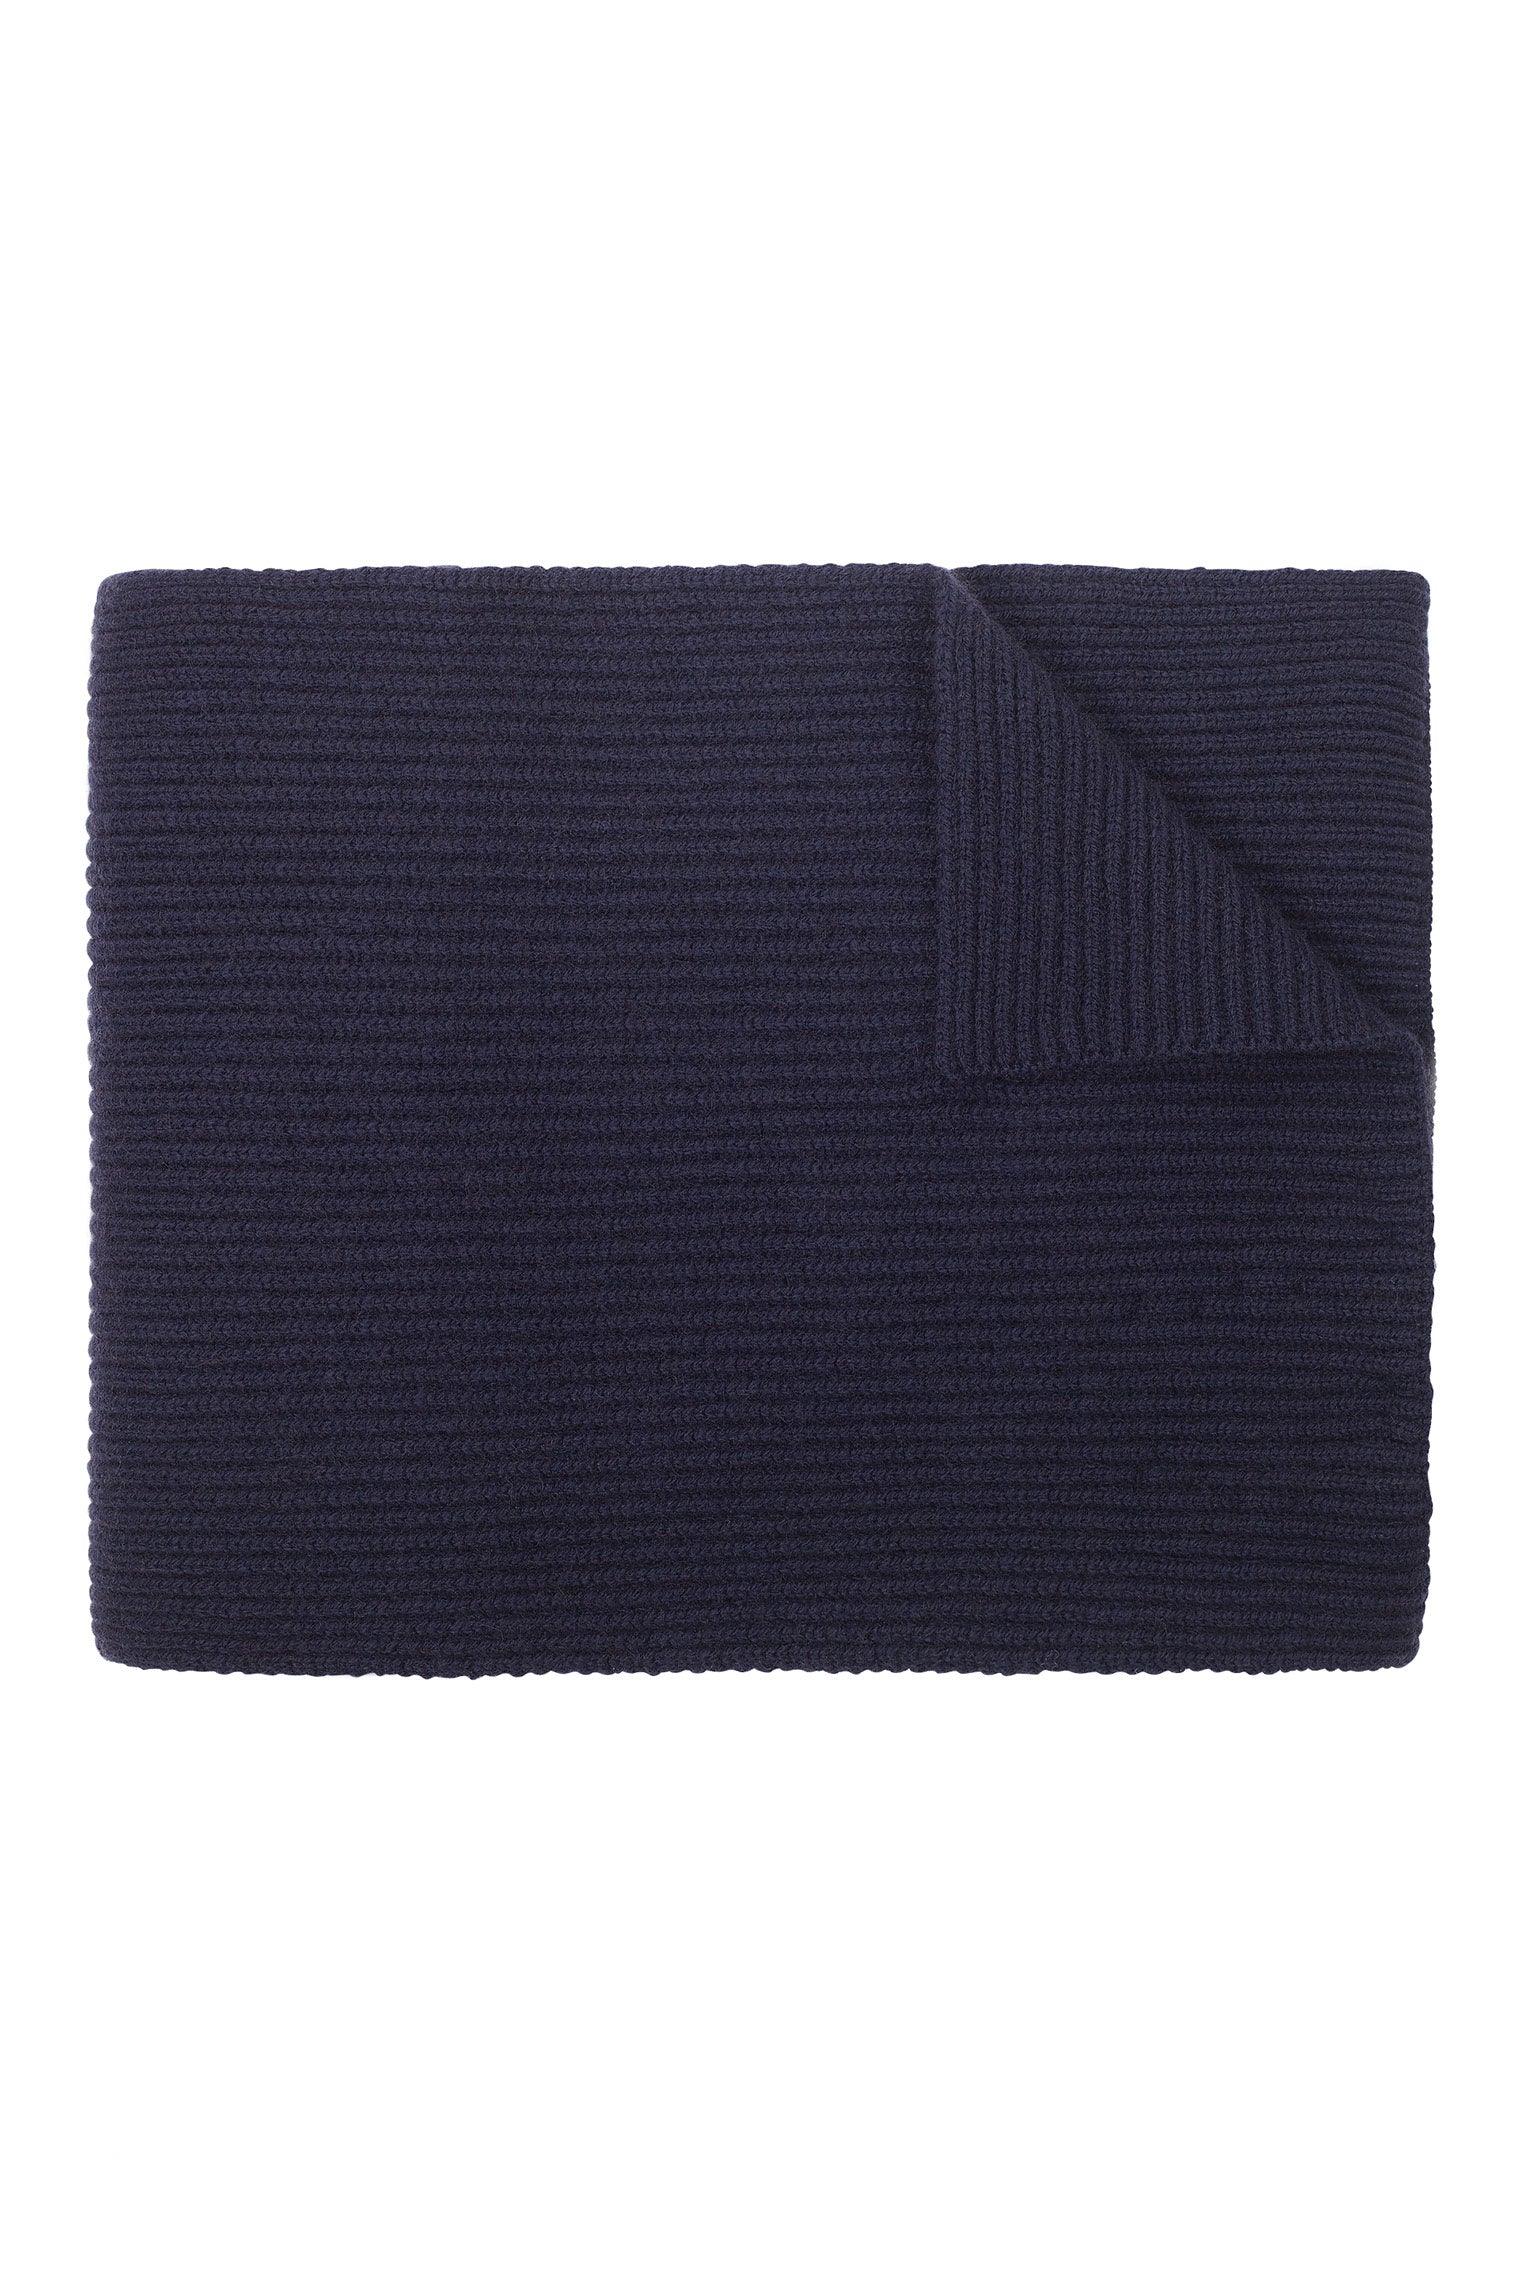 Cashmere Knitted Scarf - Women's Beanies - Lock & Co. Hatters London UK